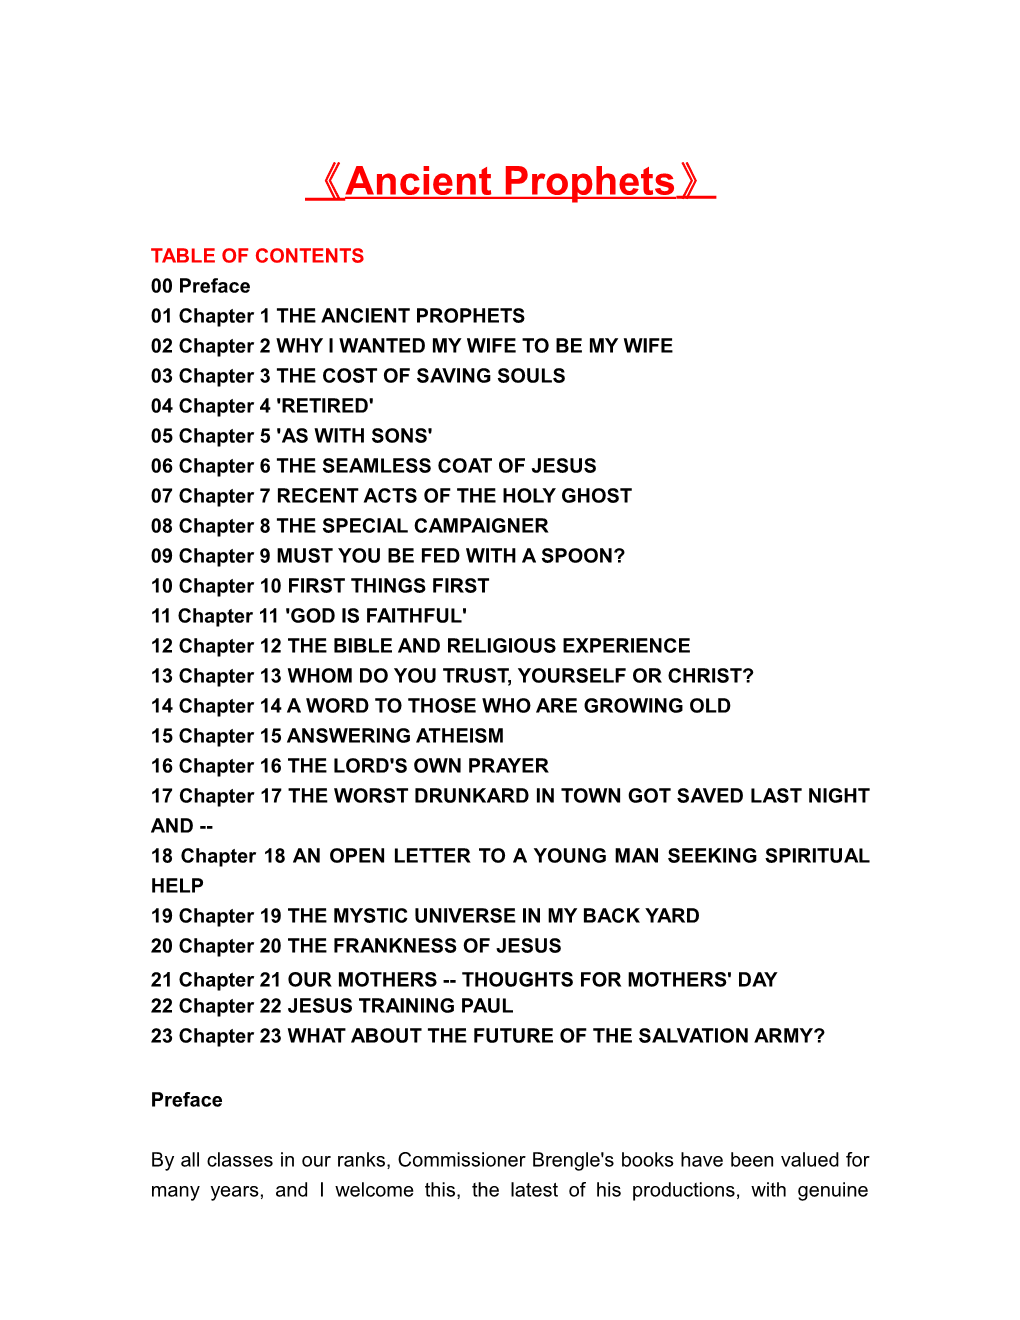 01 Chapter 1 the ANCIENT PROPHETS